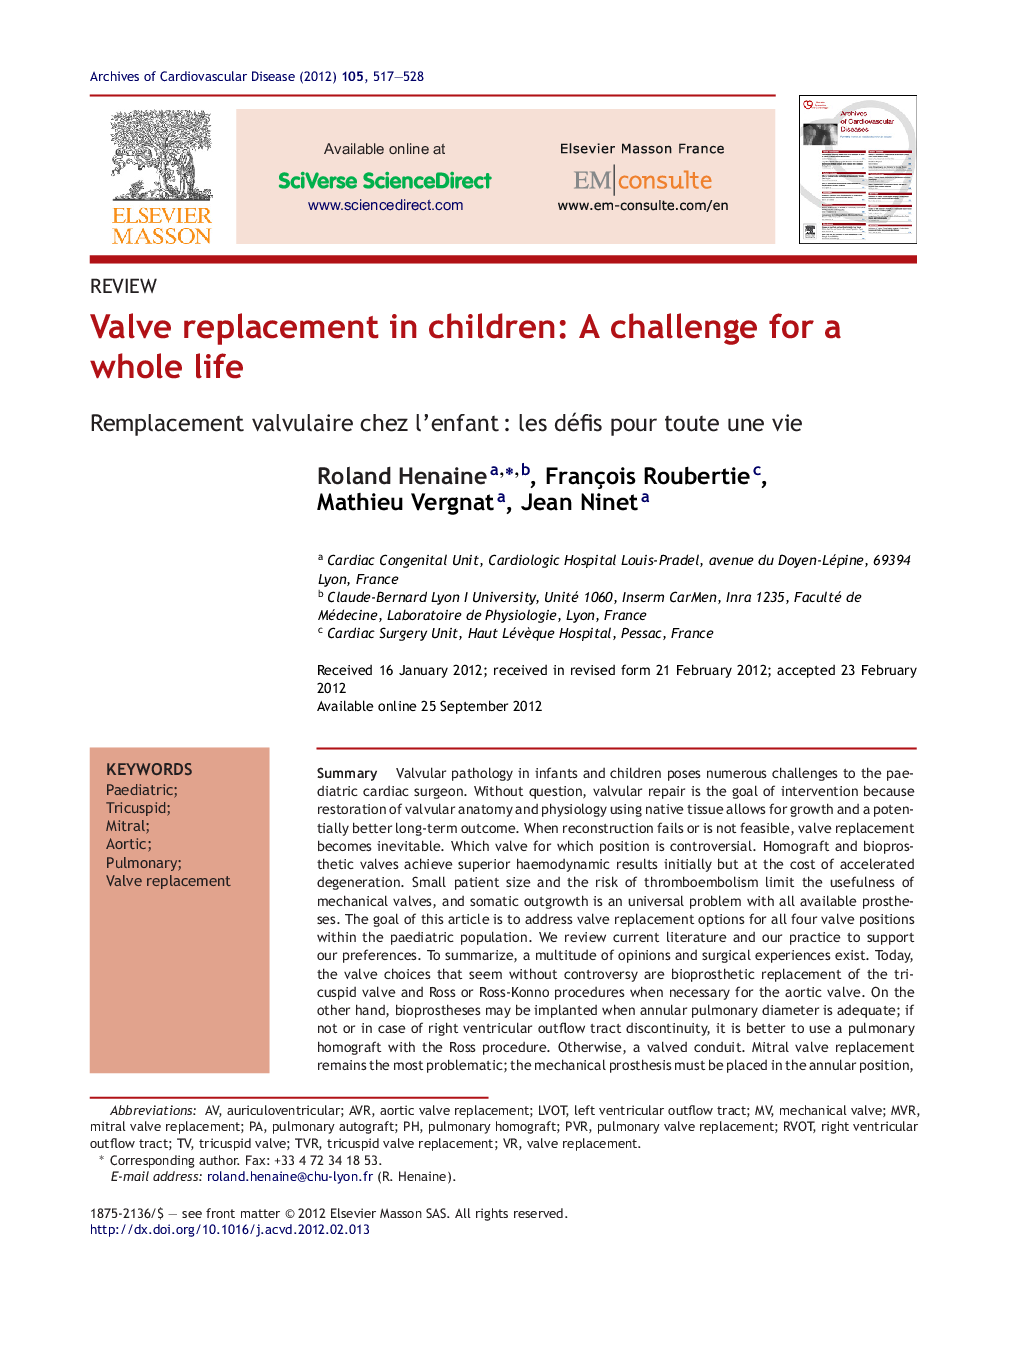 Valve replacement in children: A challenge for a whole life